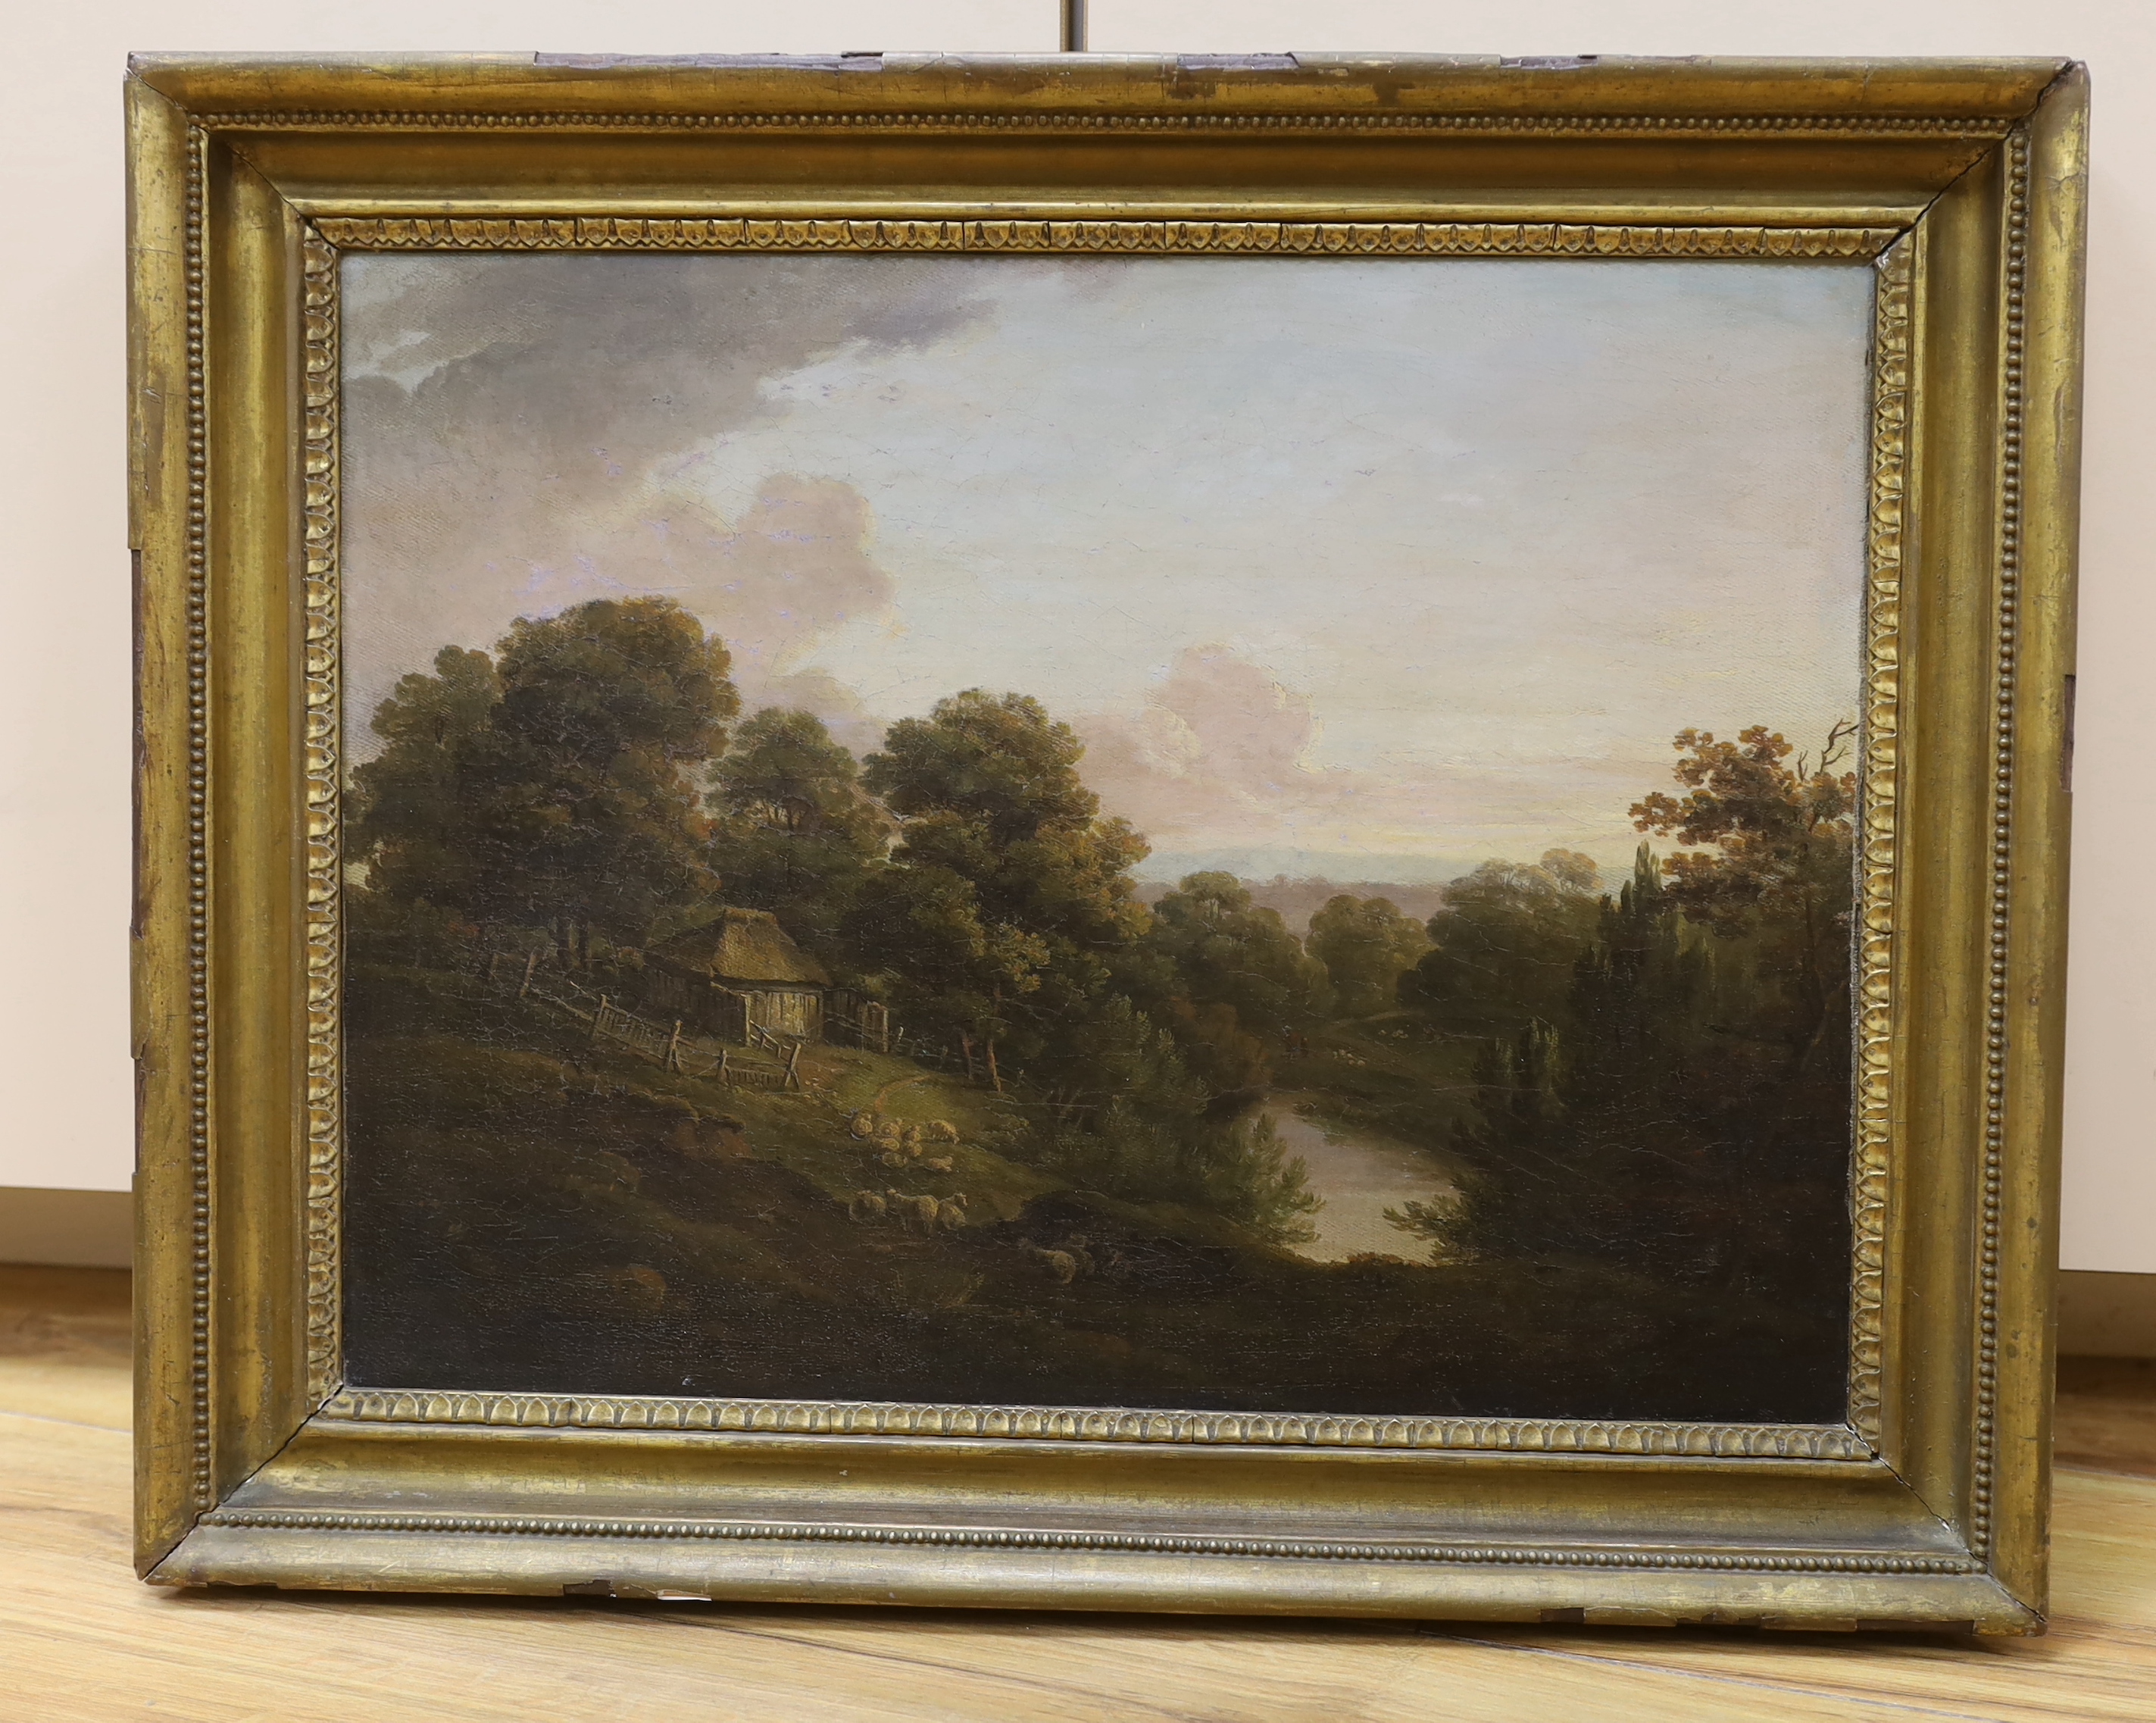 19th century, oil on canvas, Flock of sheep before a landscape, Delves House, Ringmer, Caelt Gallery - Image 2 of 3